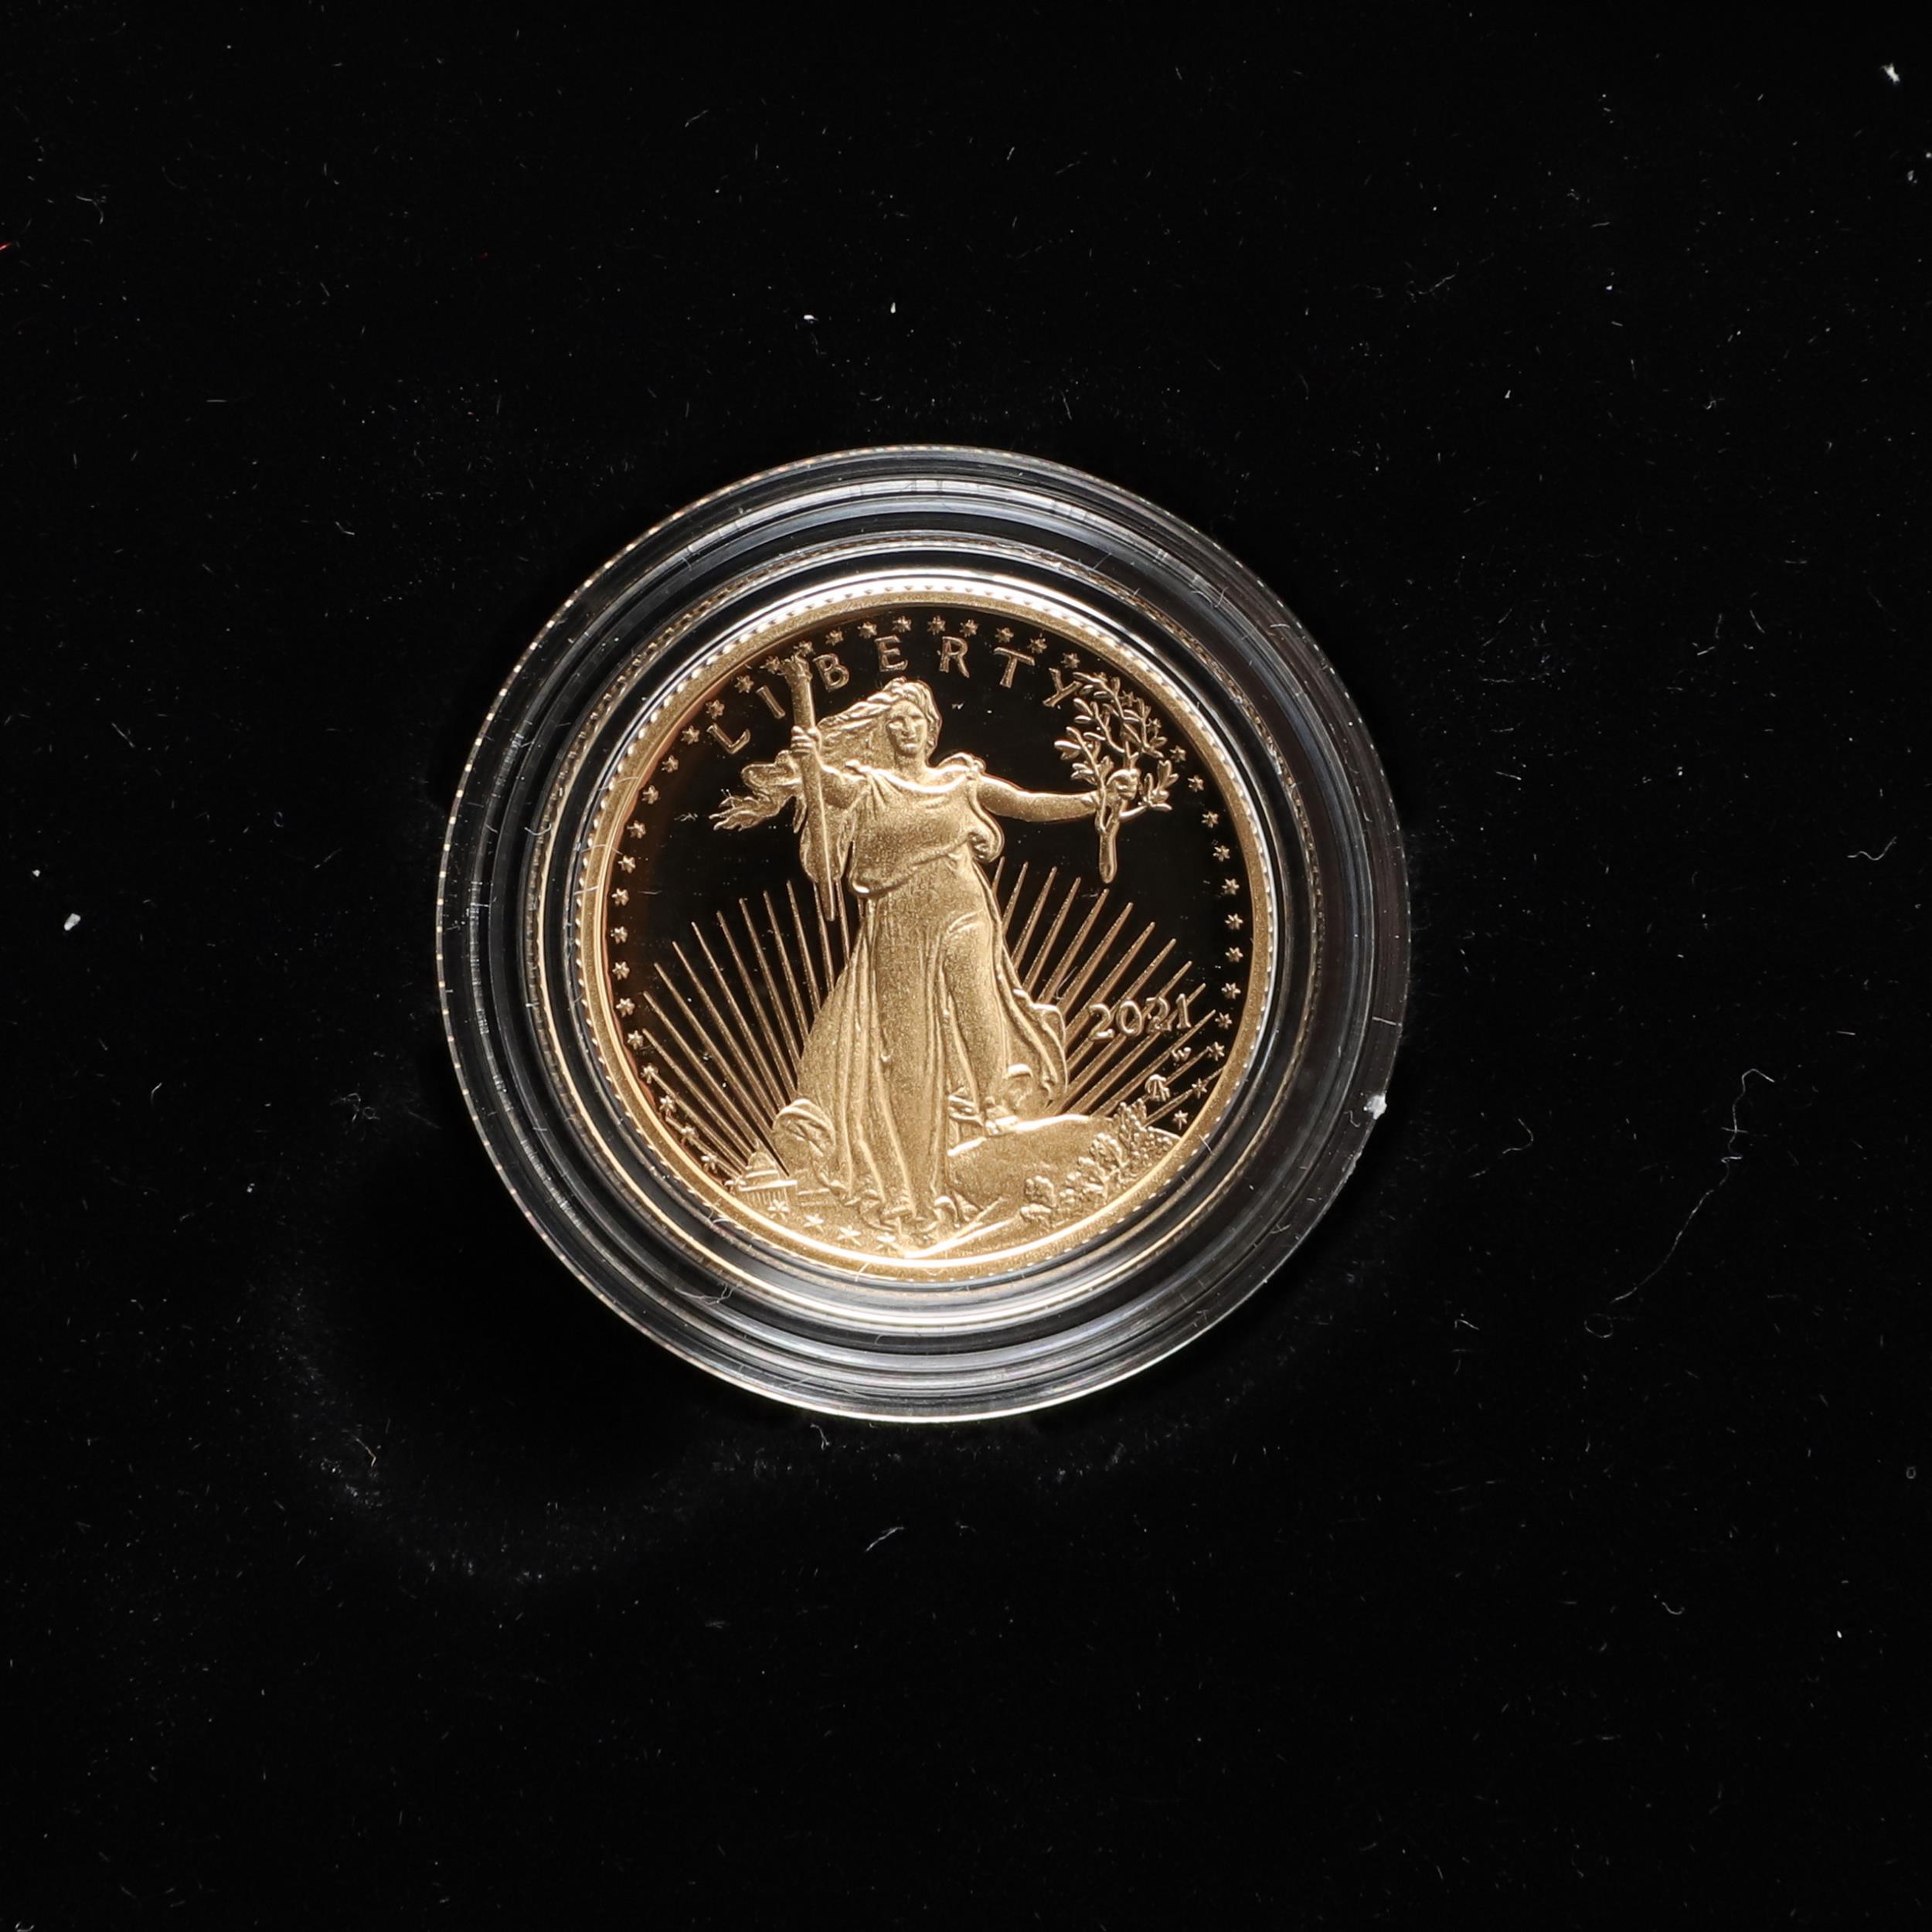 AN AMERICAN GOLD EAGLE PROOF ONE-QUARTER OUNCE COIN, 2021. - Image 3 of 7